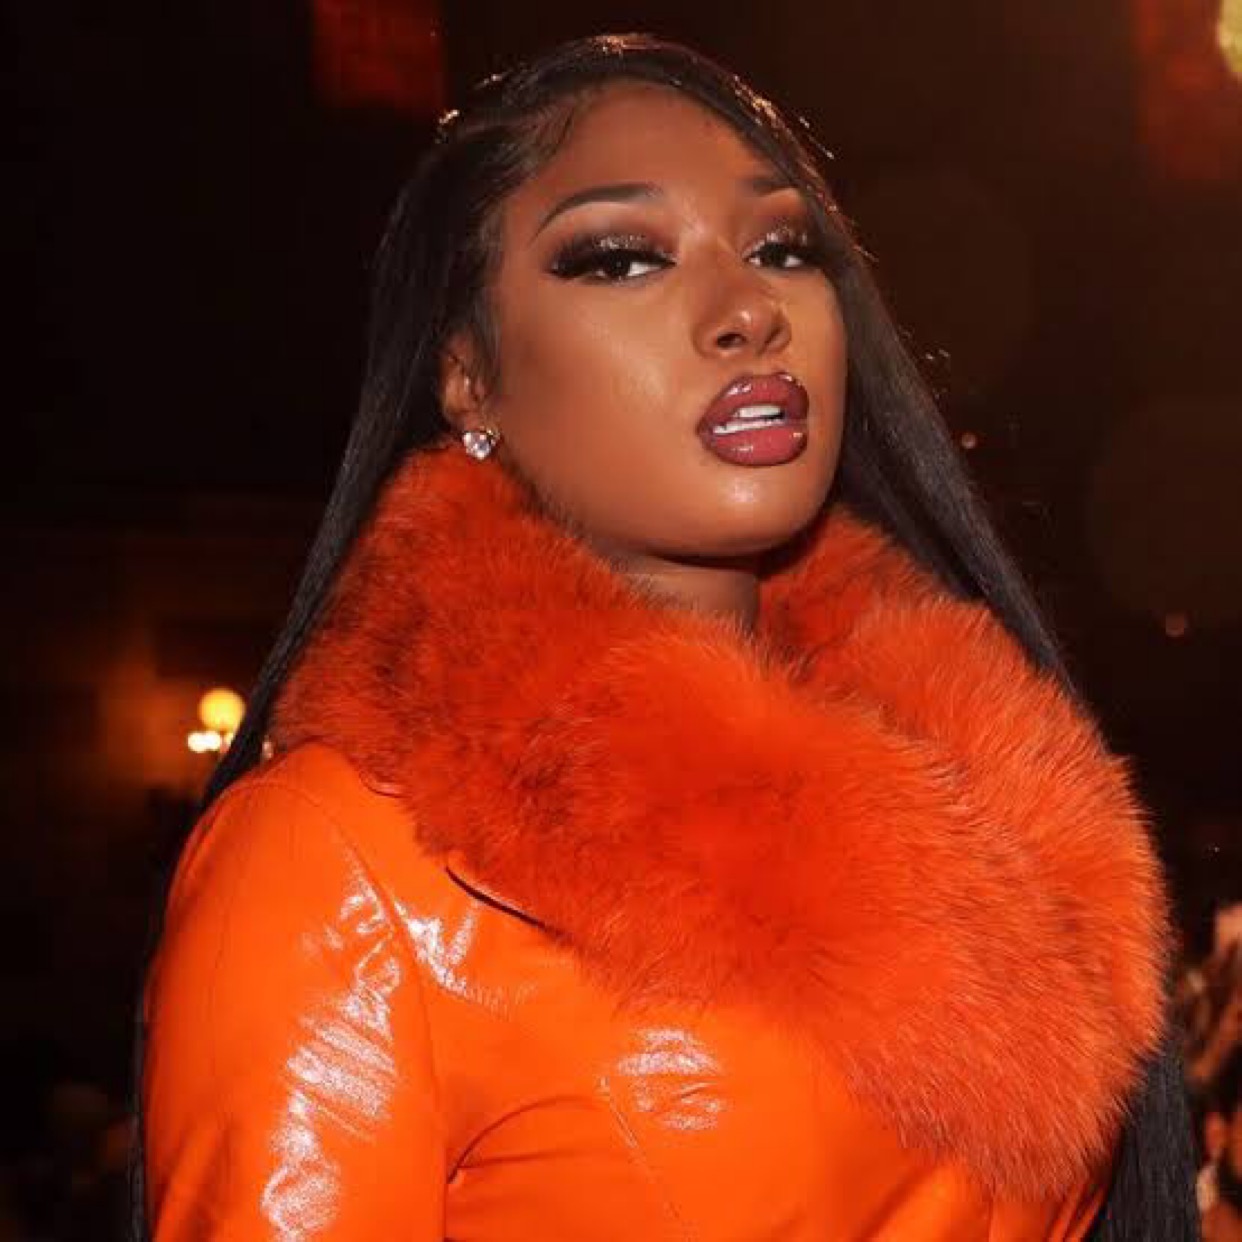 Would You Like To Attend Megan Thee Stallion’s Graduation?